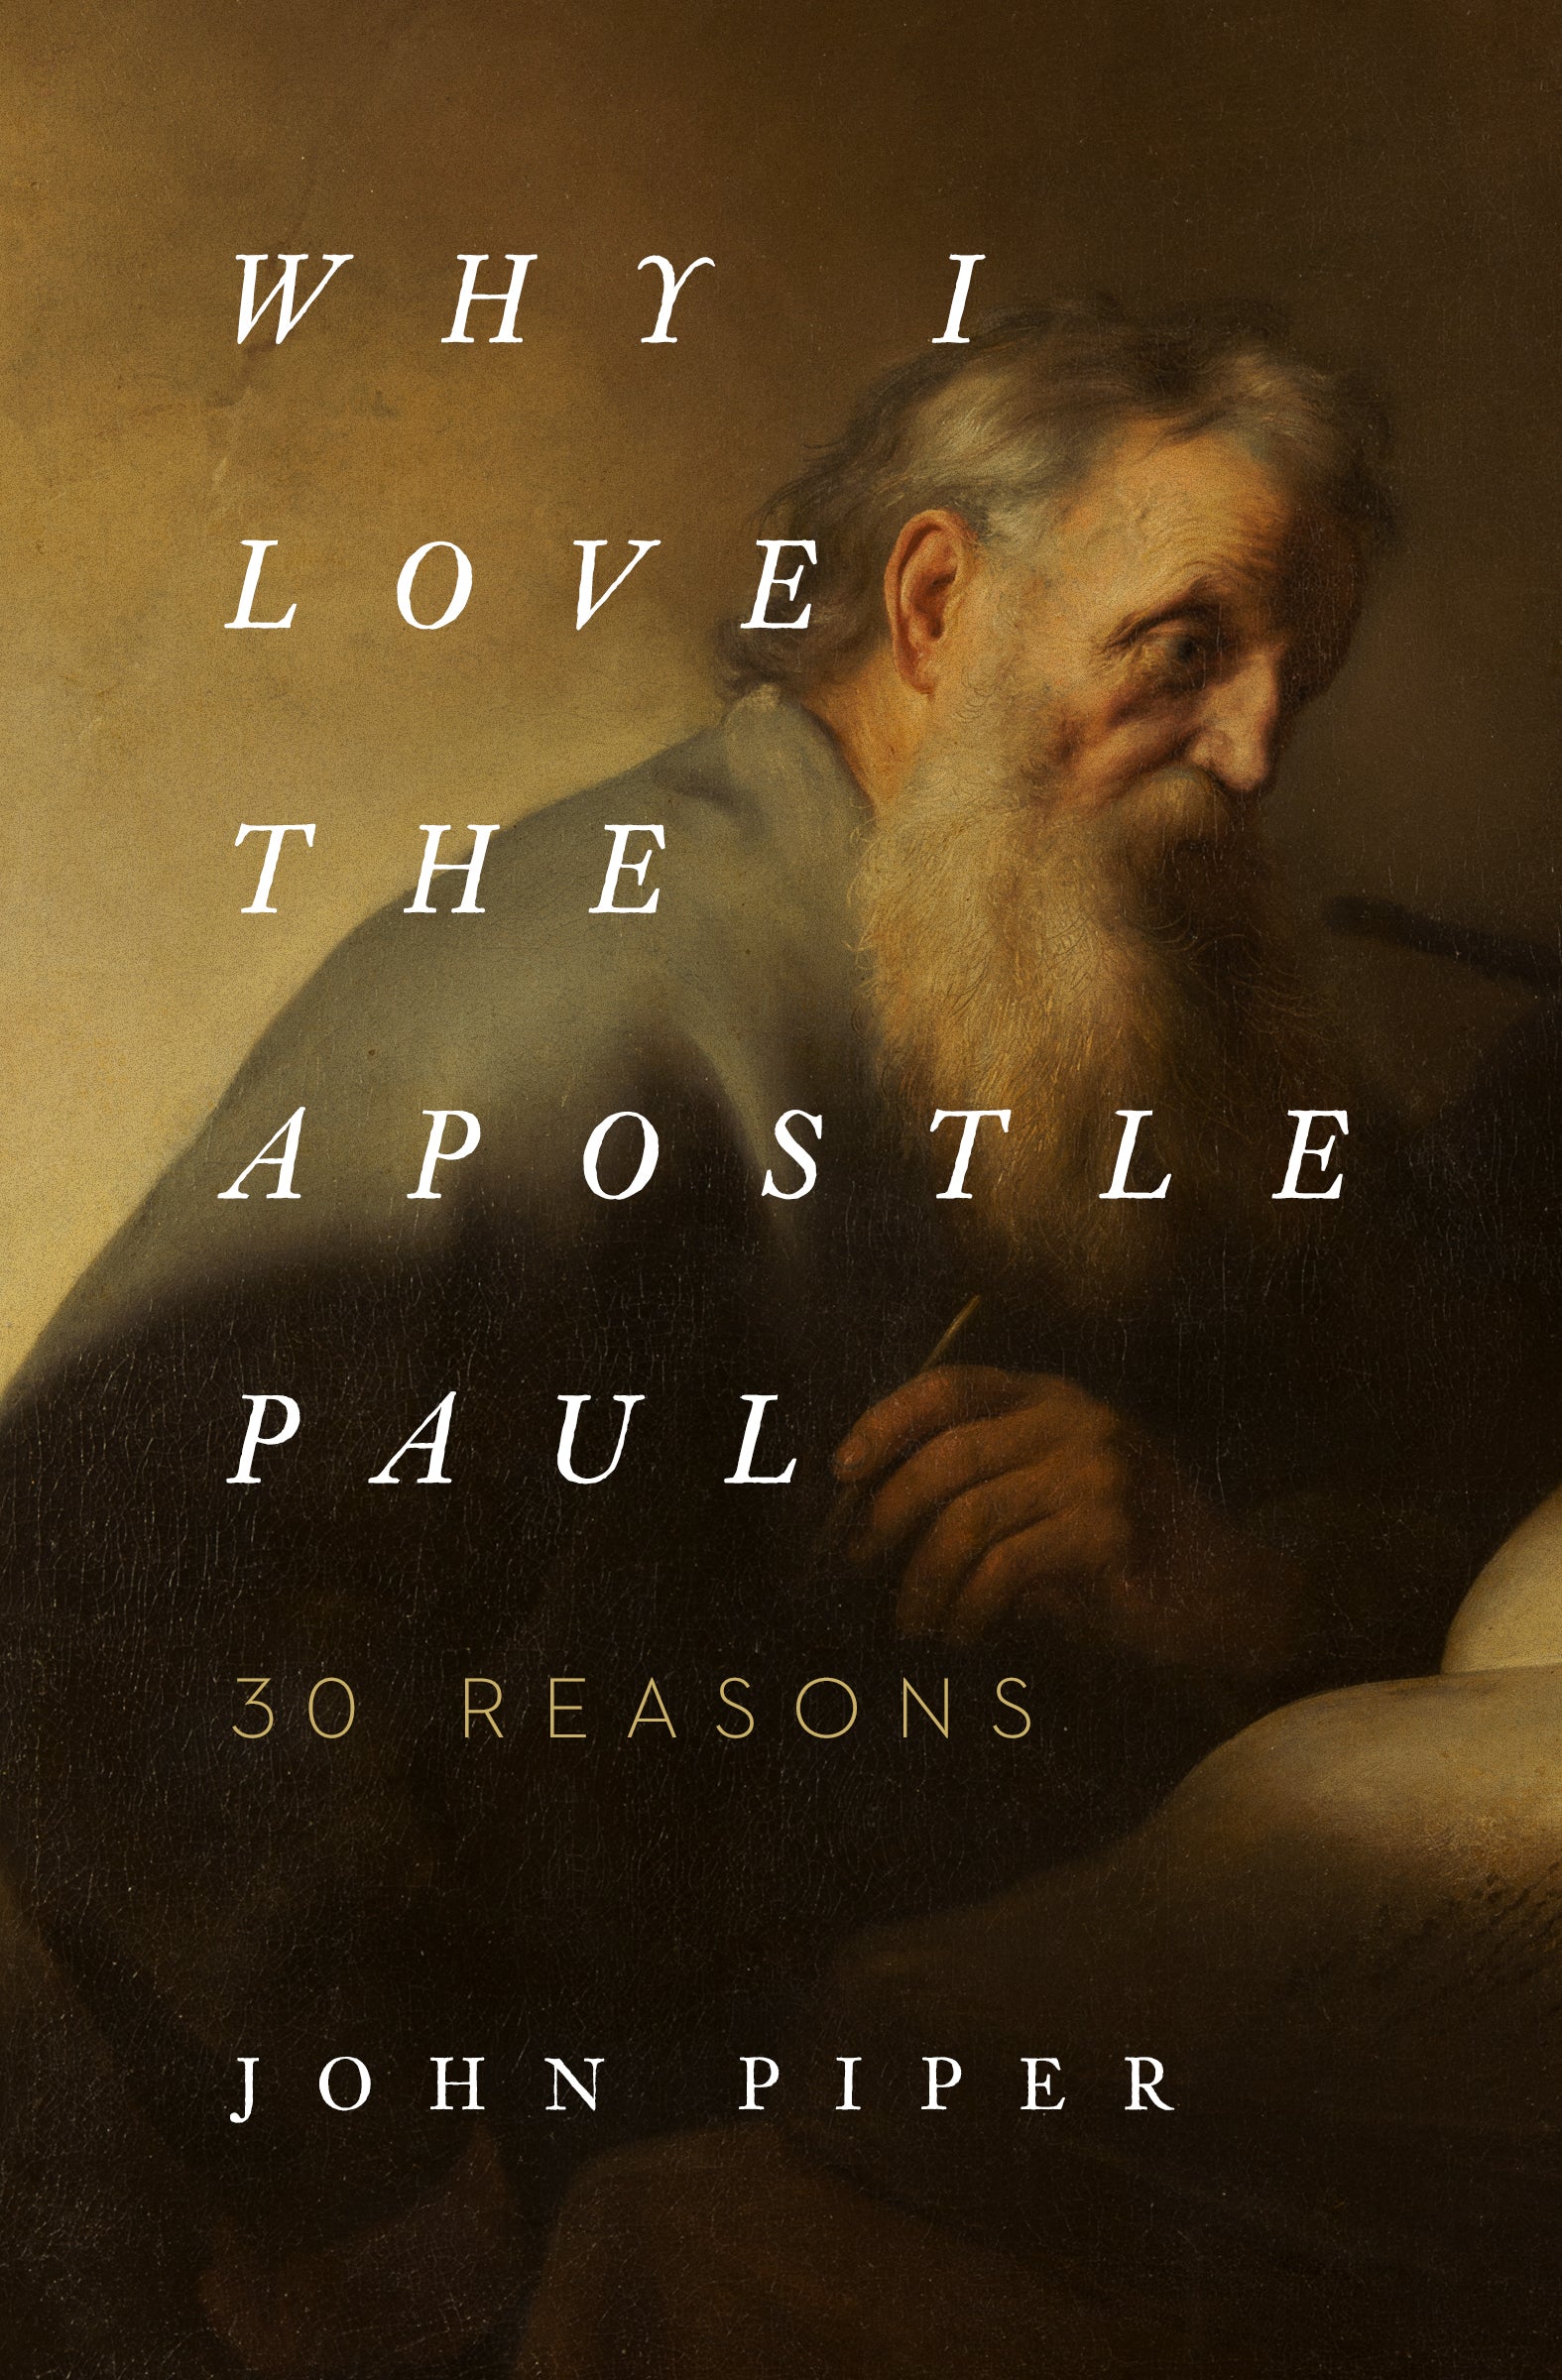 Image of Why I Love the Apostle Paul other